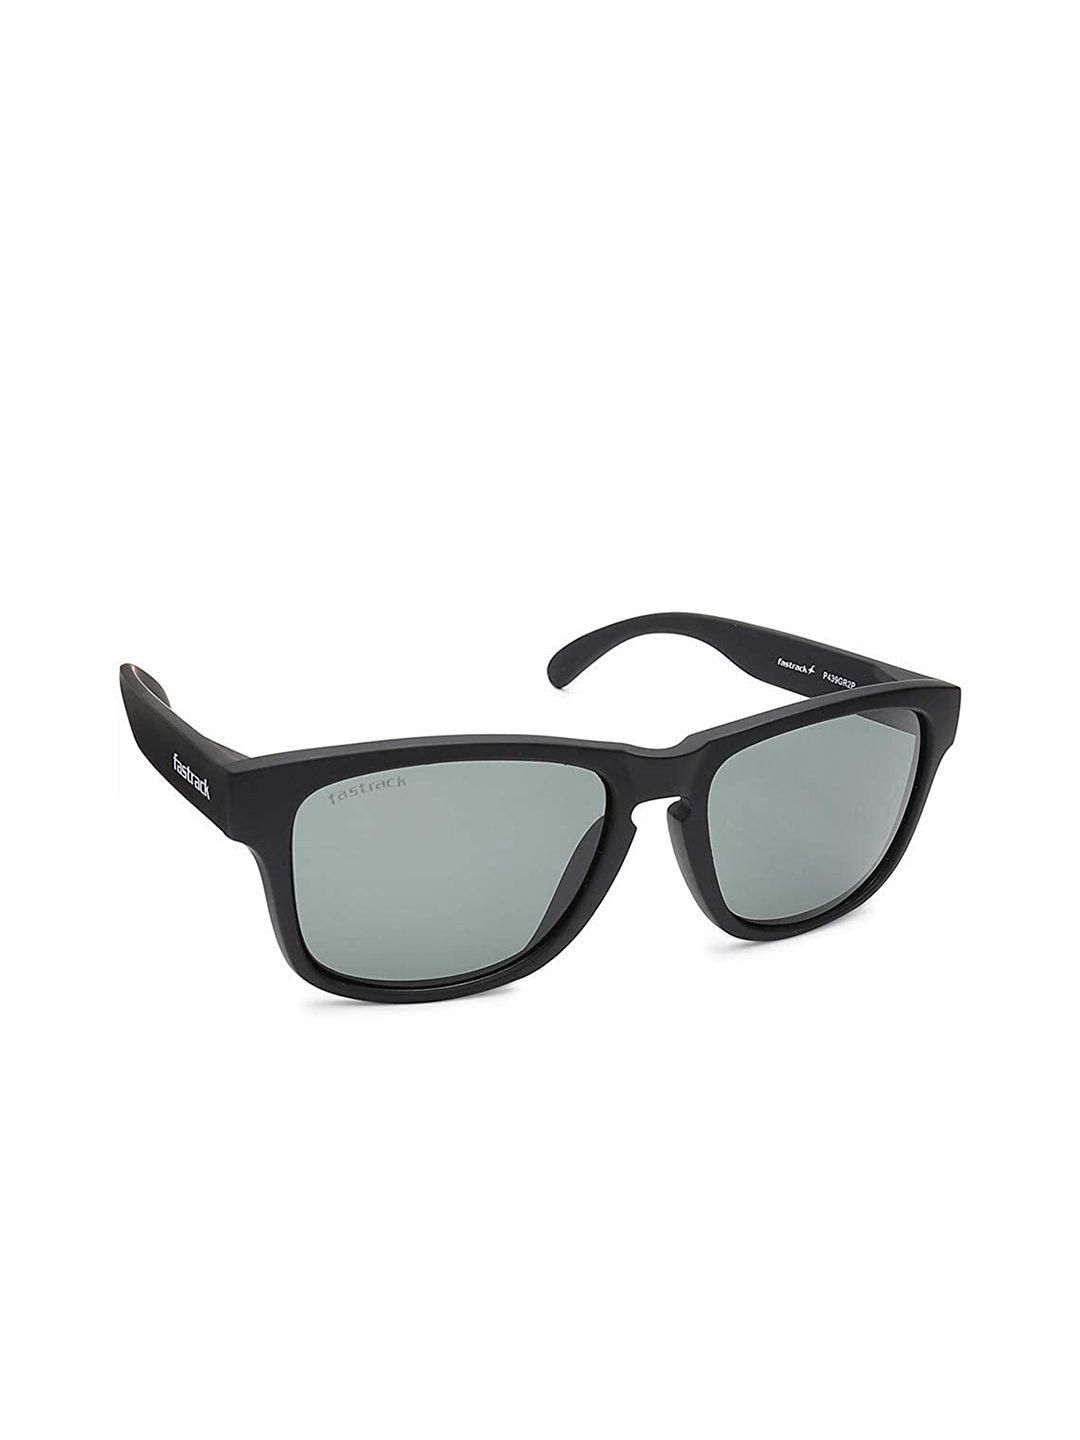 Fastrack Unisex Square Sunglasses with UV Protected Lens - P439GR2P